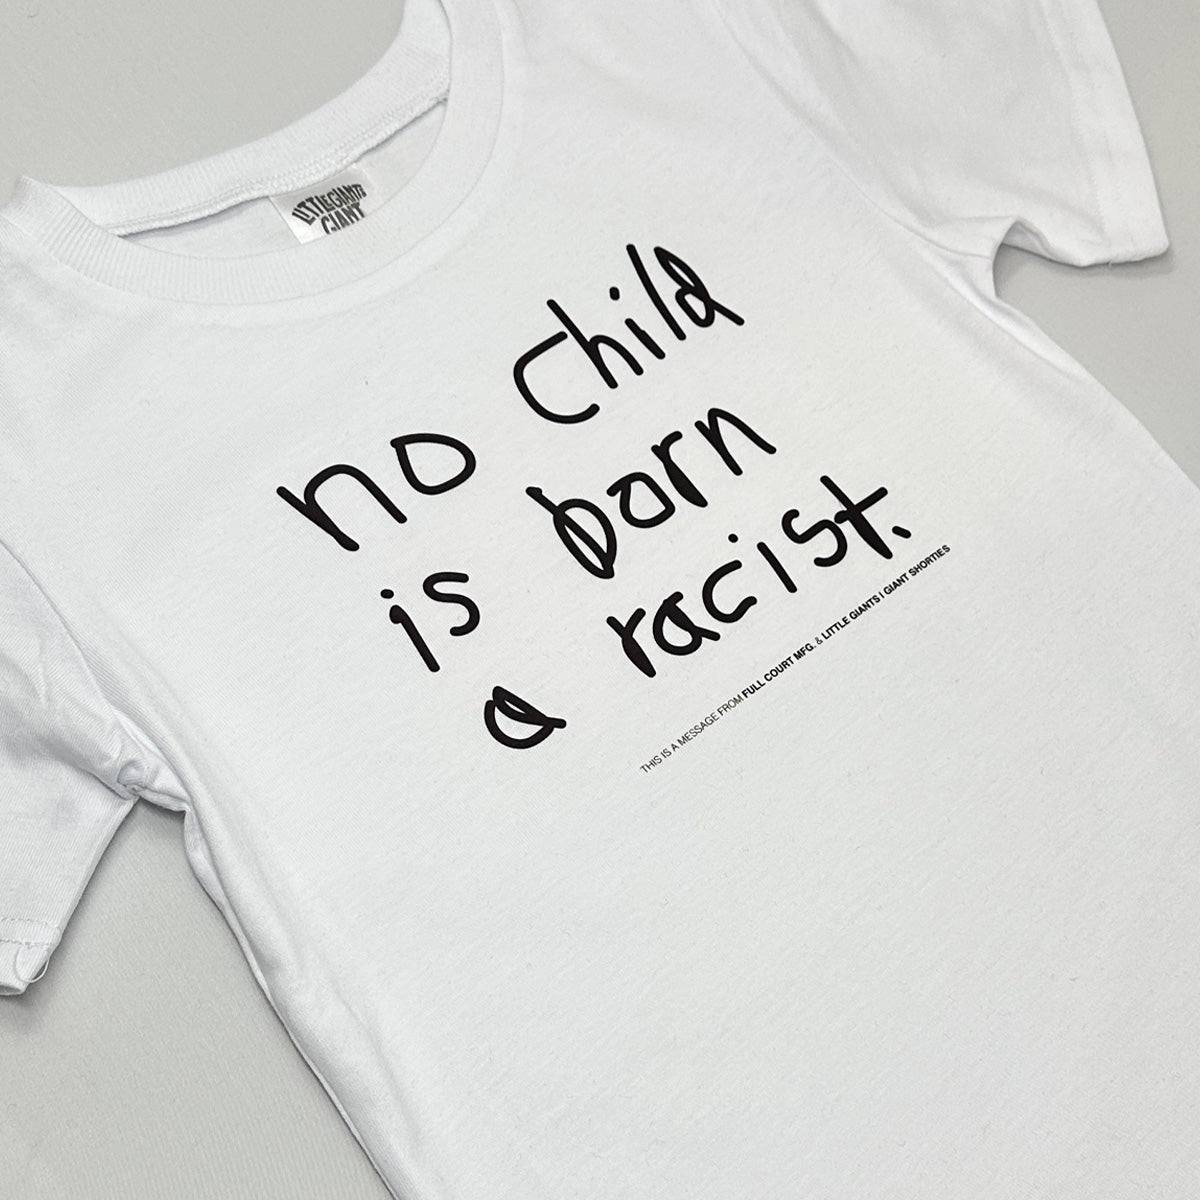 No Child is Born a Racist T-Shirt (White)